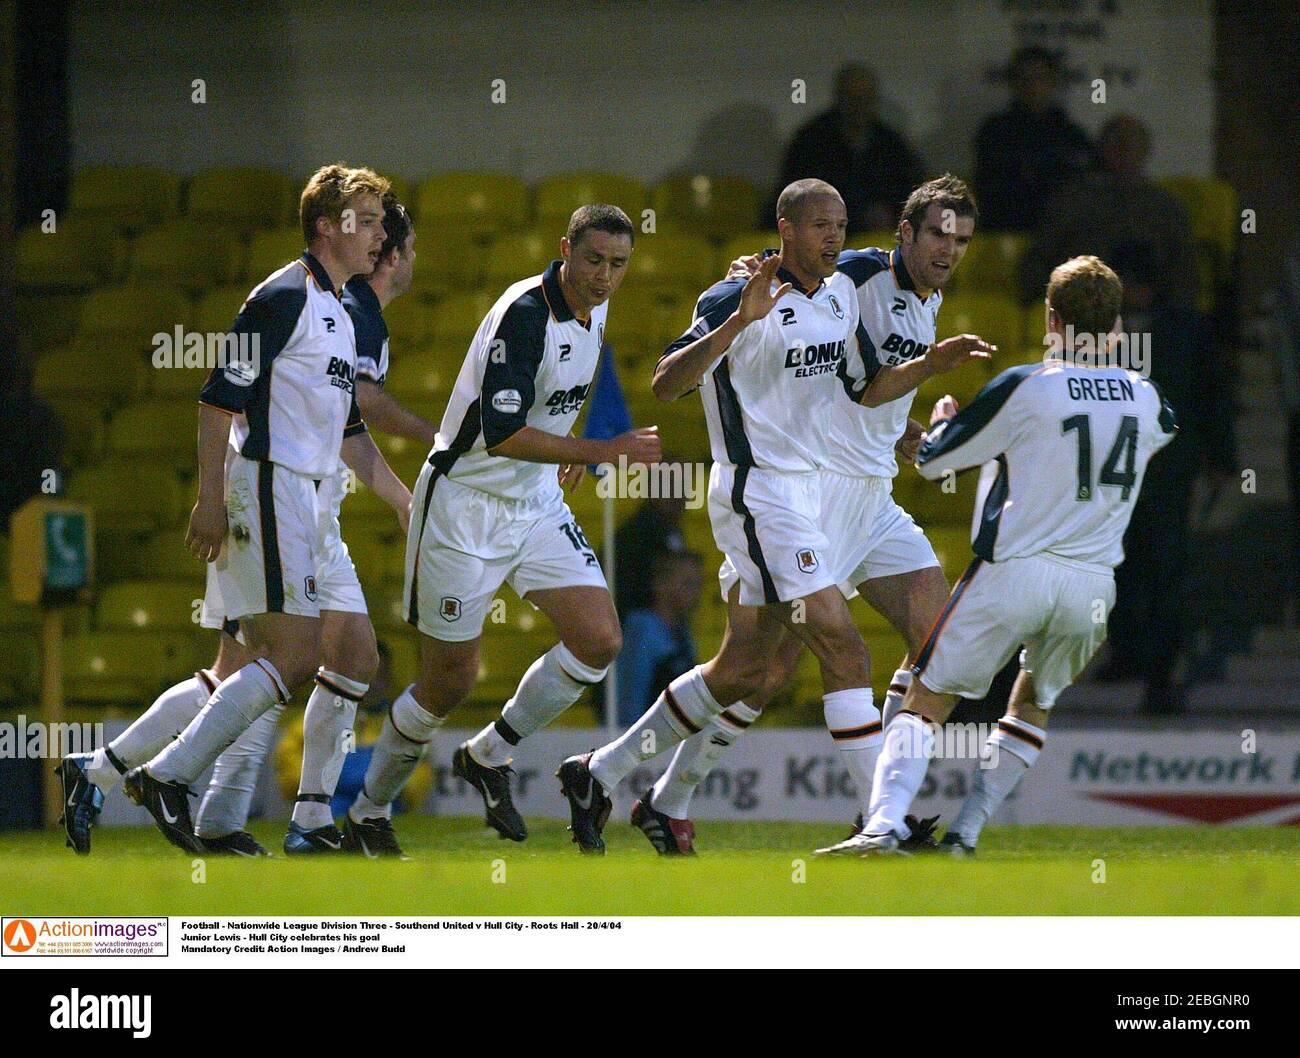 Fußball - Nationwide League Division Three - Southend United gegen Hull City - Roots Hall - 20/4/04 Junior Lewis - Hull City feiert sein Ziel Pflichtkredit: Action Images / Andrew Budd Stockfoto